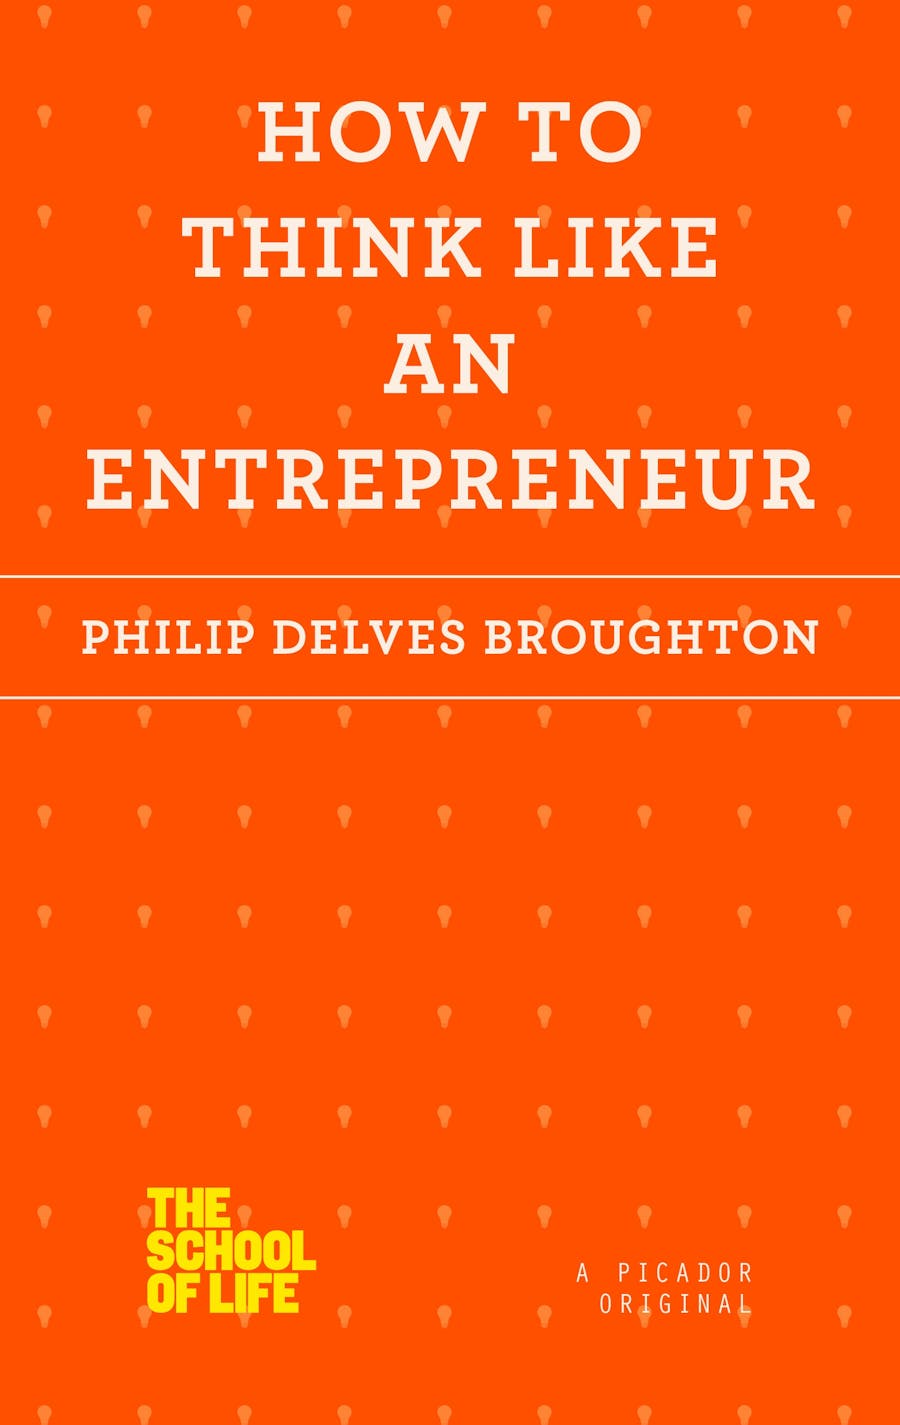 How to Think Like an Entrepreneur by Philip Delves Broughton